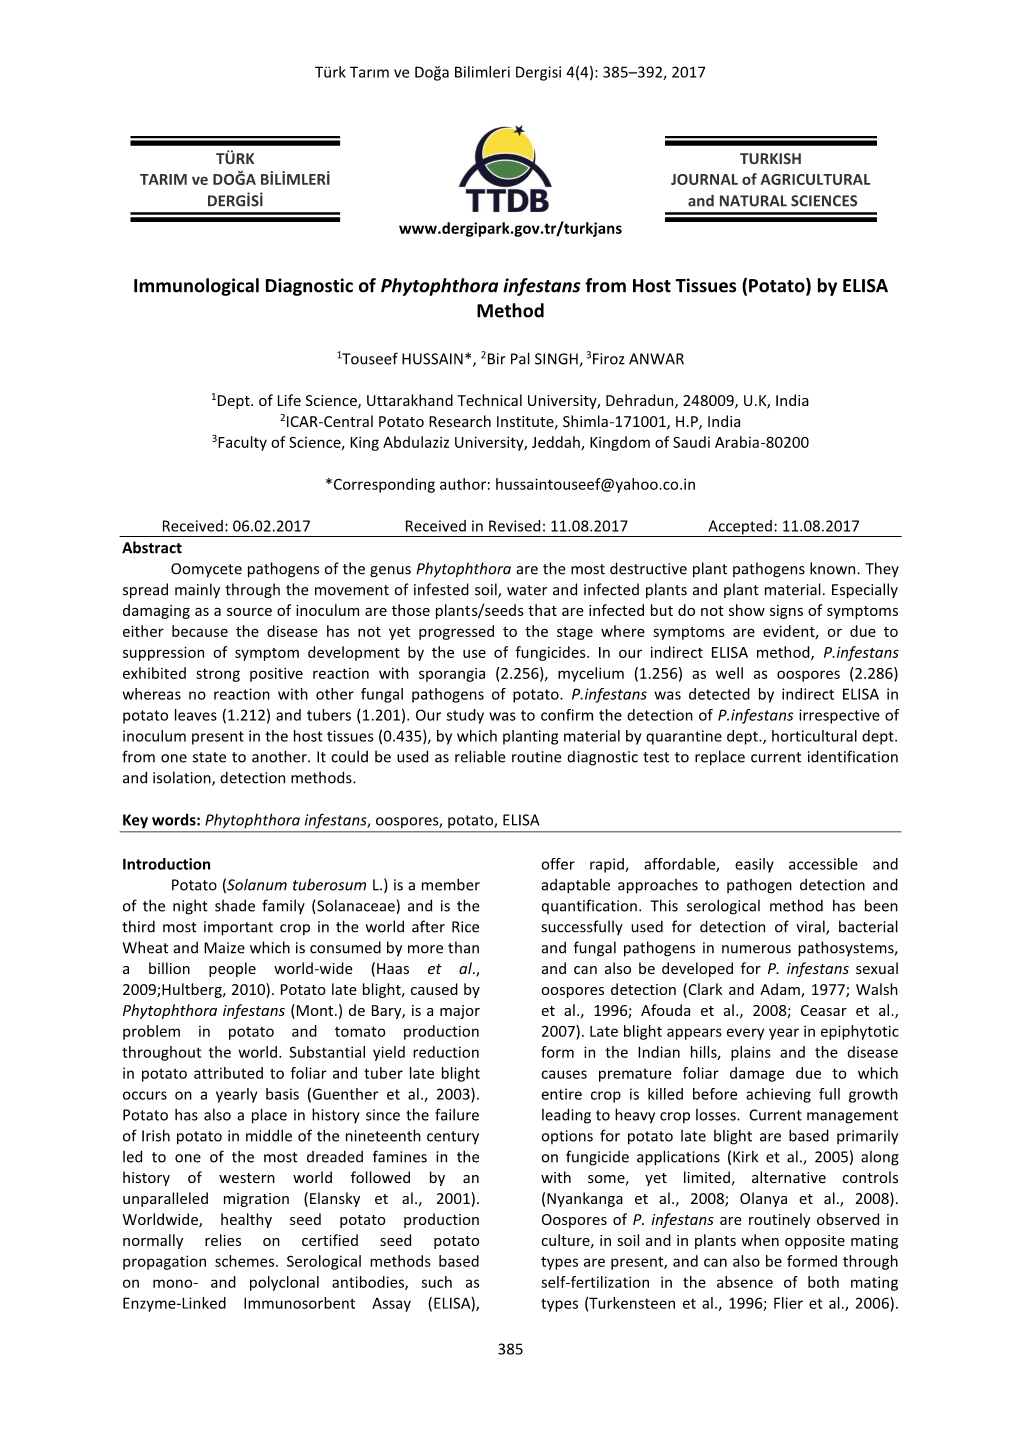 Immunological Diagnostic of Phytophthora Infestans from Host Tissues (Potato) by ELISA Method